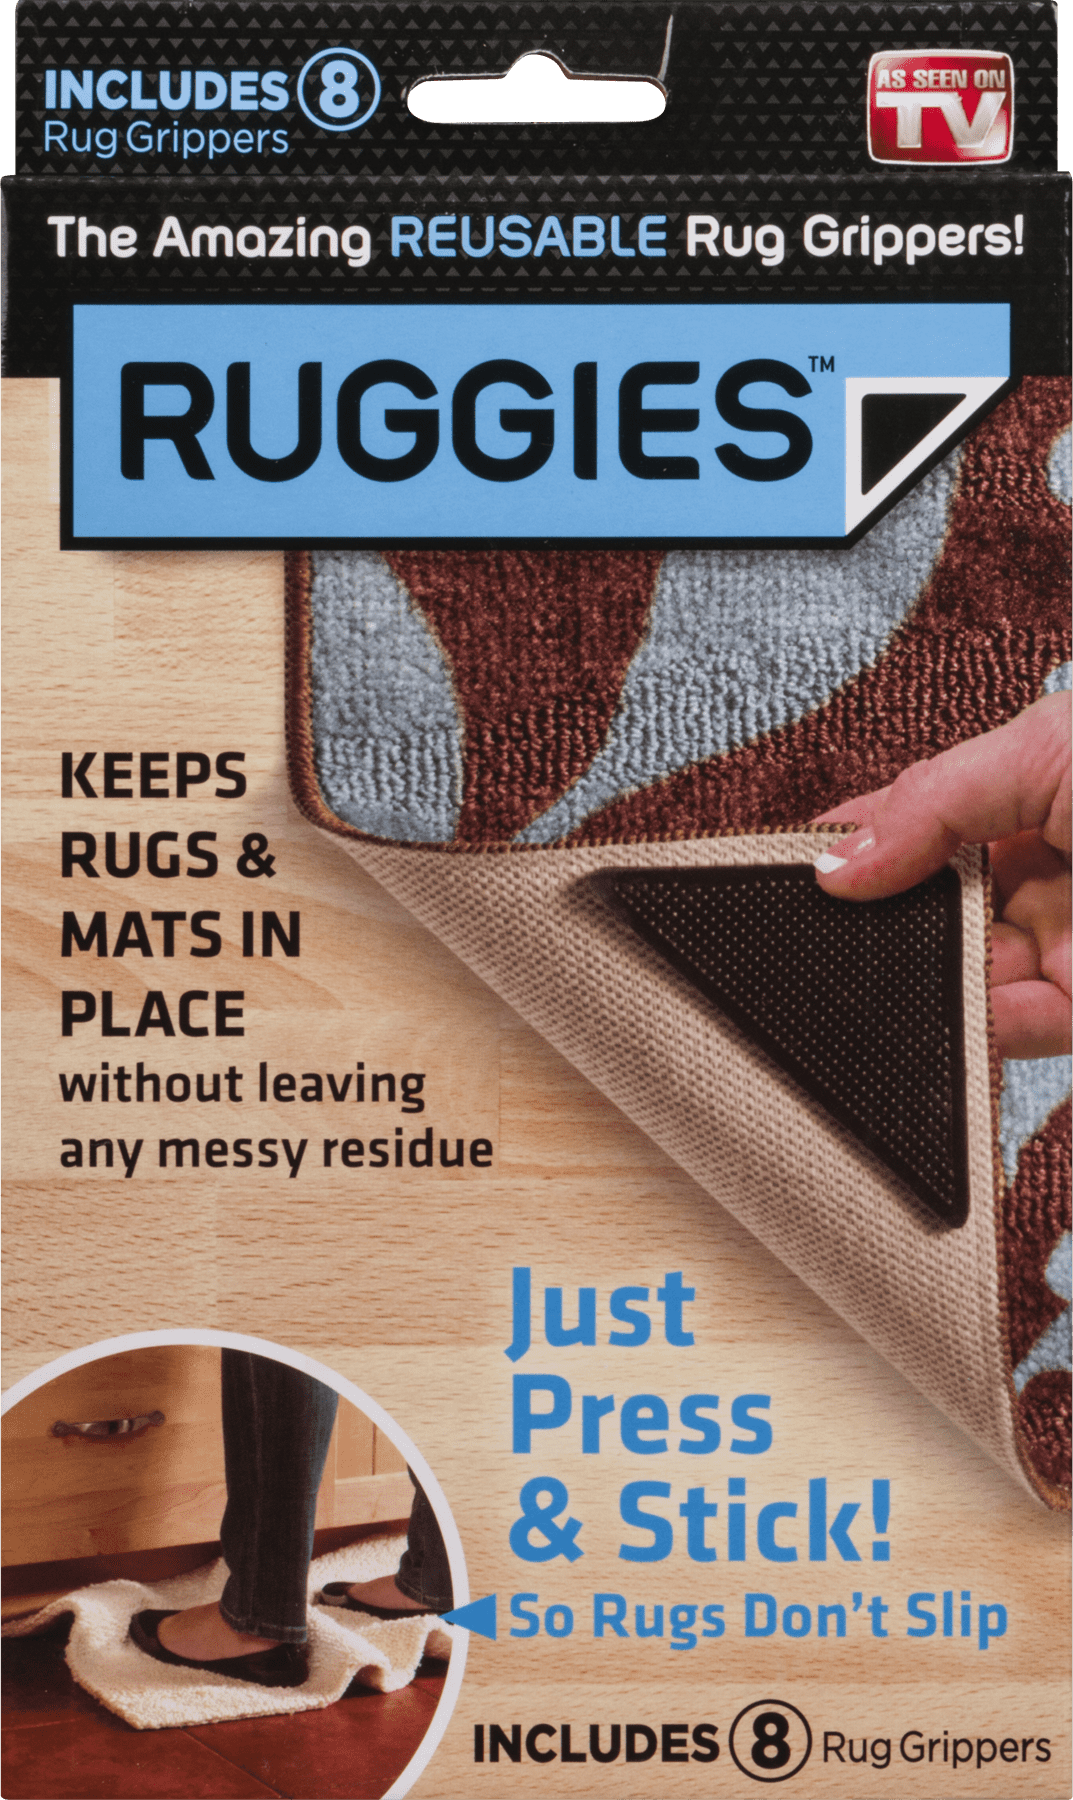 Ruggies As Seen on TV Rug Gripper Stopper Rug Pad ruggy Washable Carpet Pad Floor Gripper Suction Grip Stopper Corner Carpet Holder Include 8